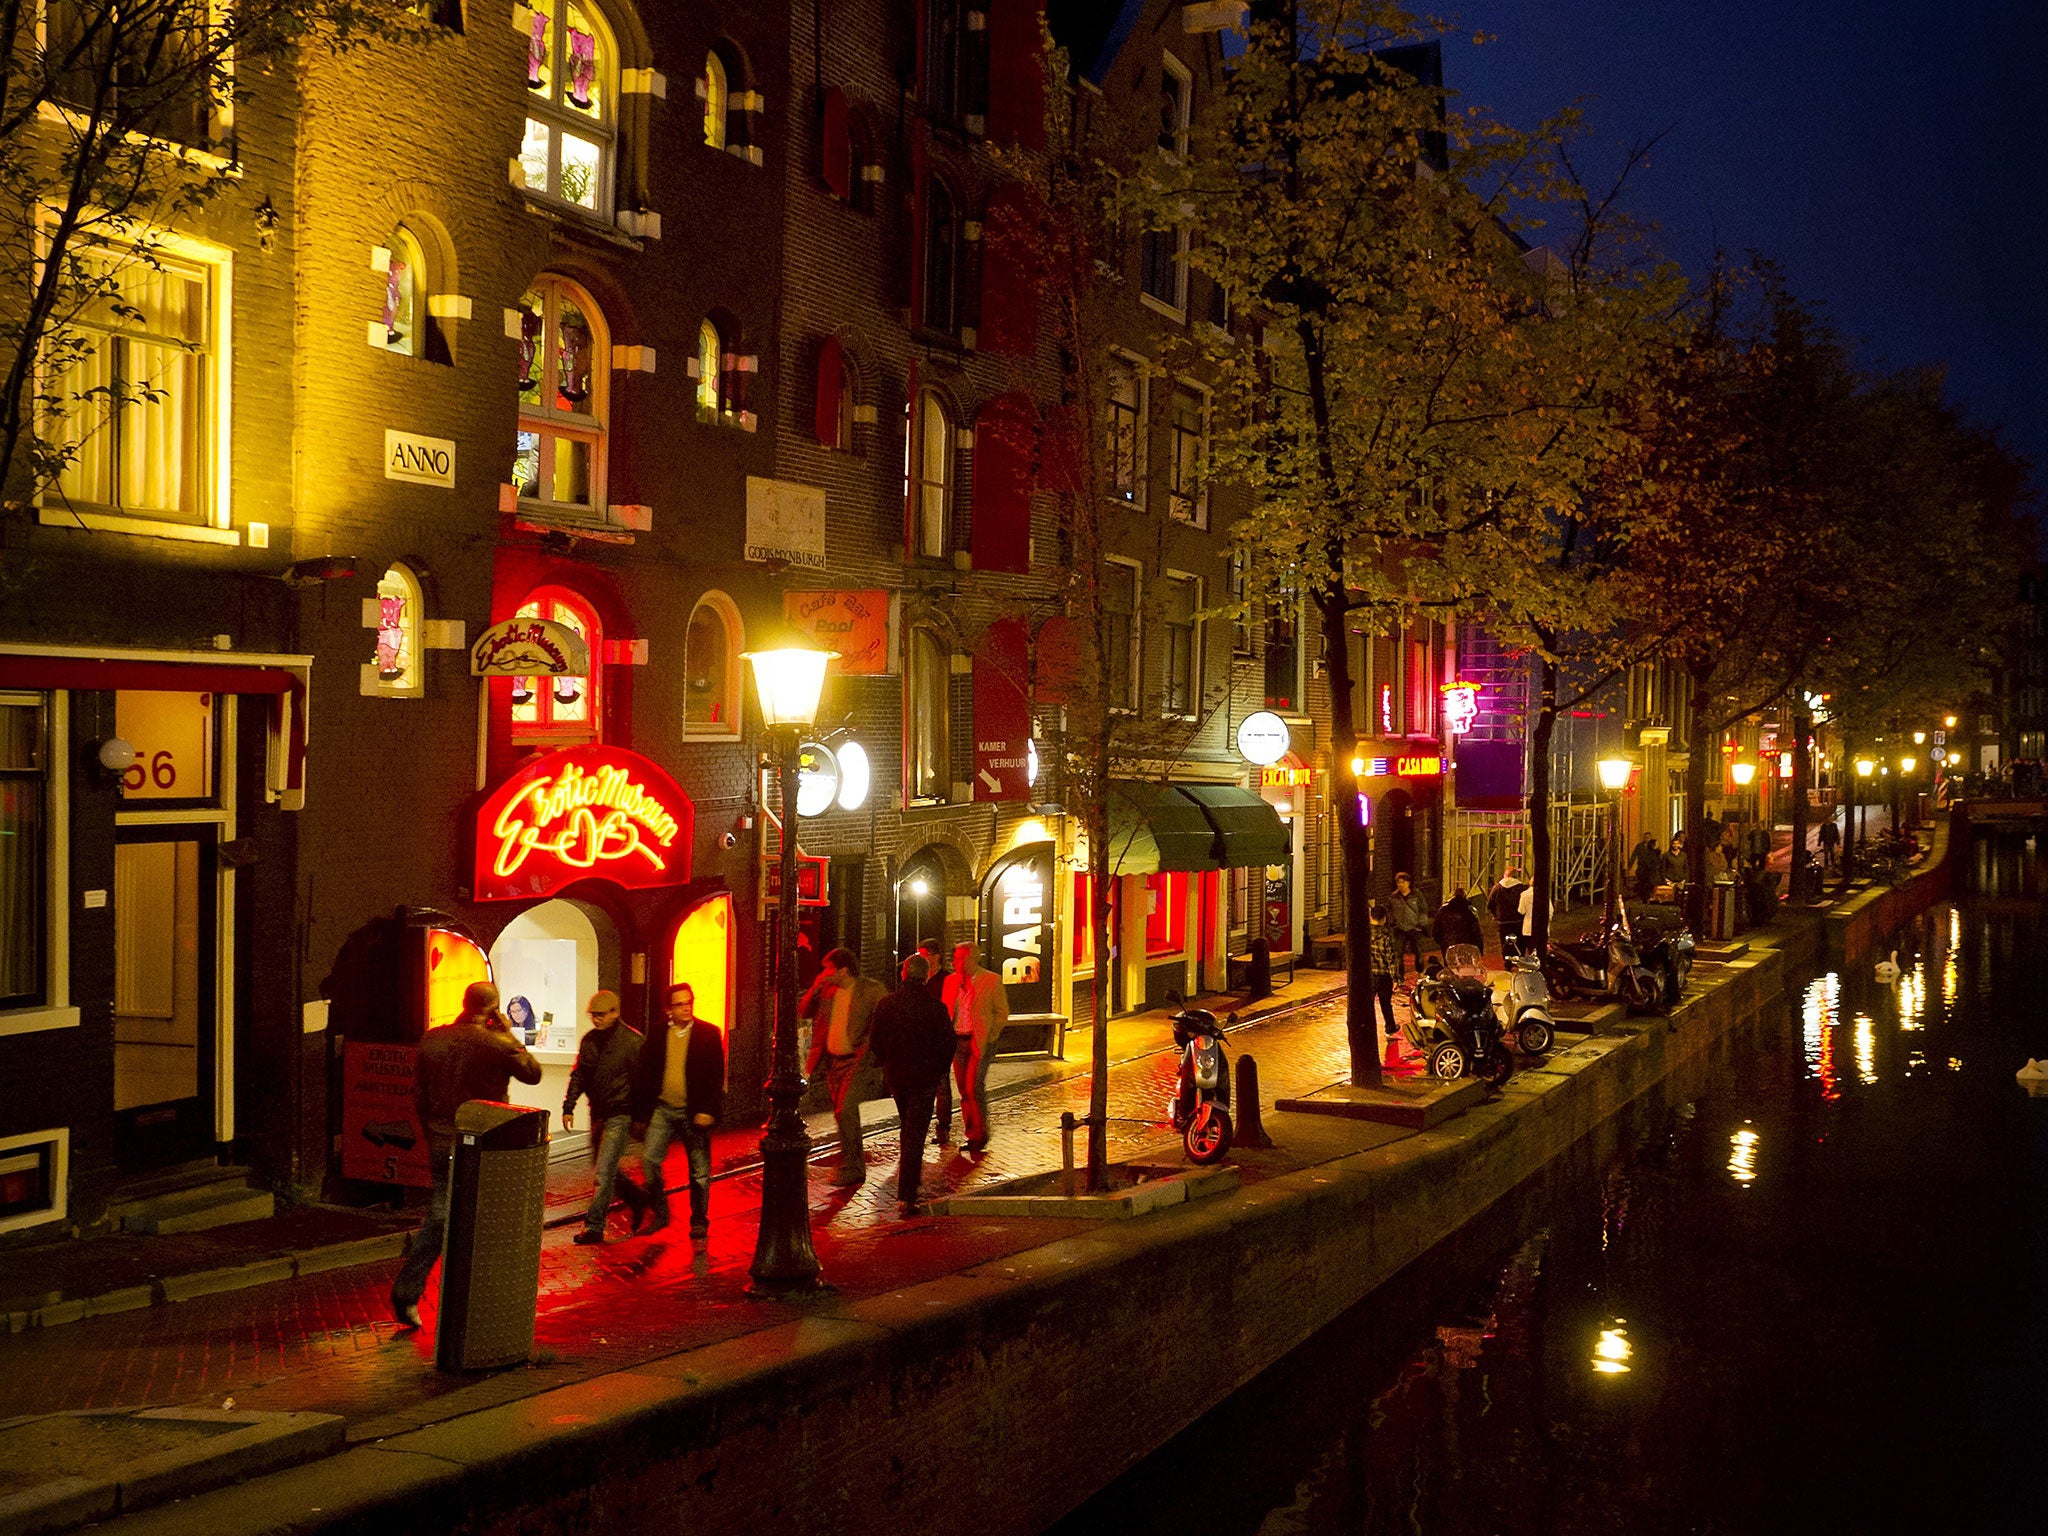 The proposals would see British men who visit prostitutes in Amsterdam’s notorious red-light district face charges in Britain